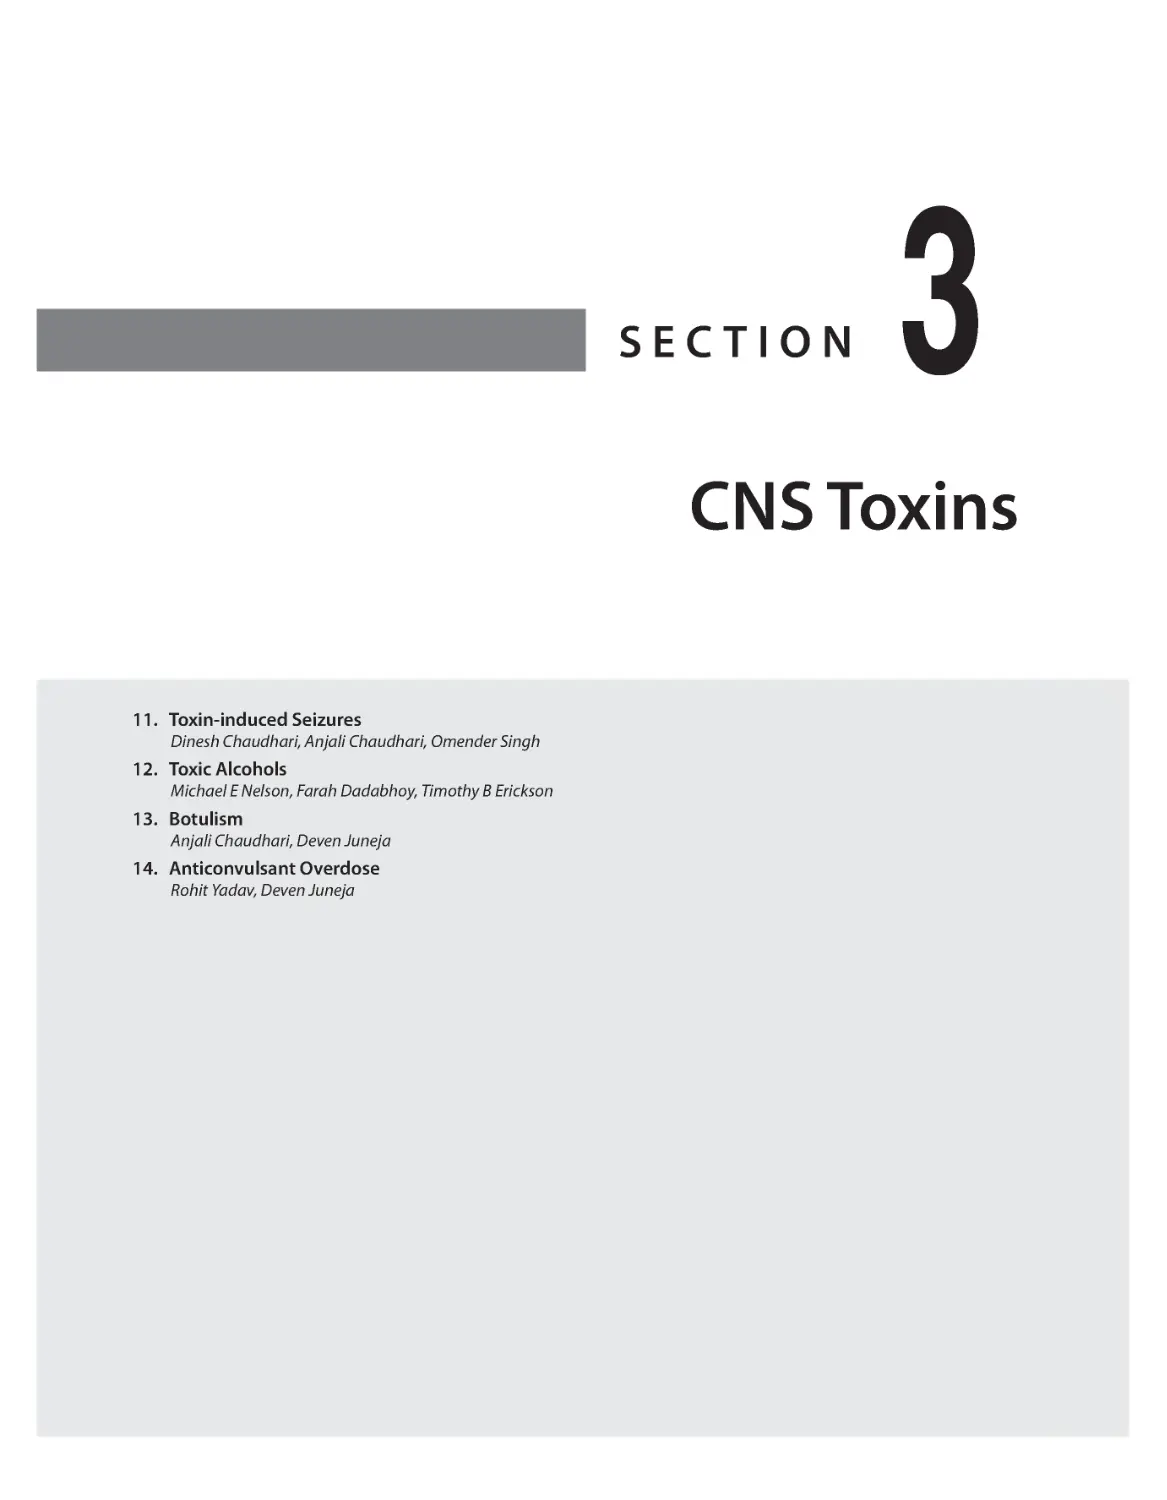 SECTION 3: CNS Toxins